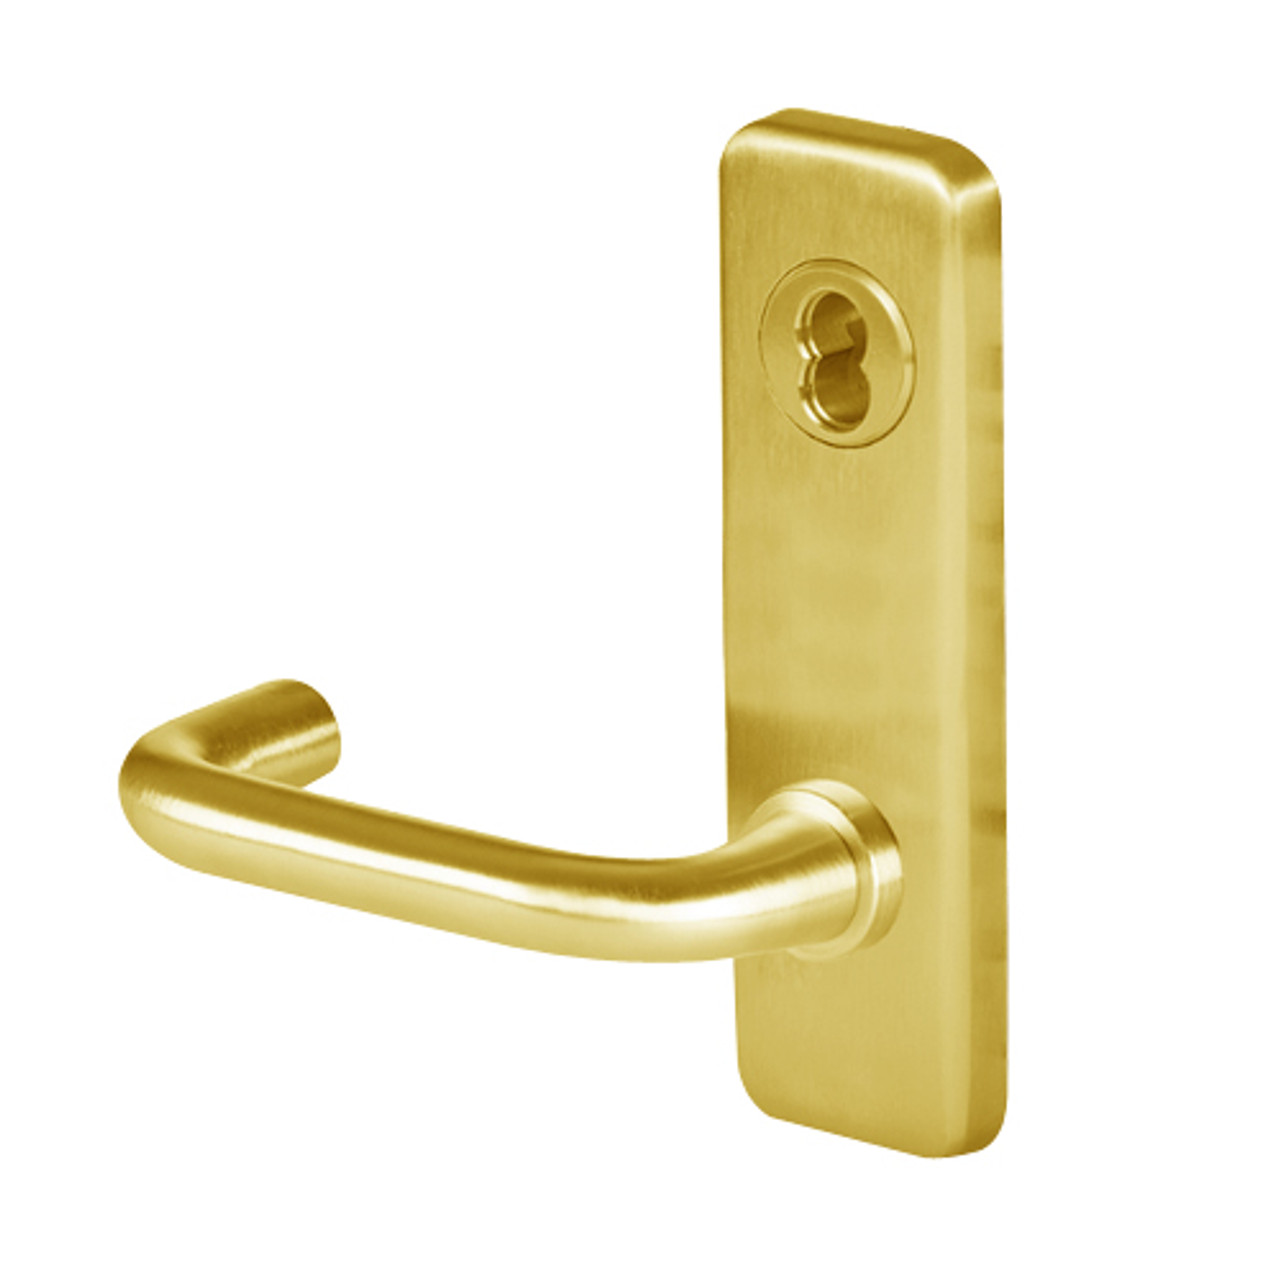 45HW7DEU3J605 Best 40HW series Single Key Latch Fail Secure Electromechanical Mortise Lever Lock with Solid Tube w/ Return Style in Bright Brass